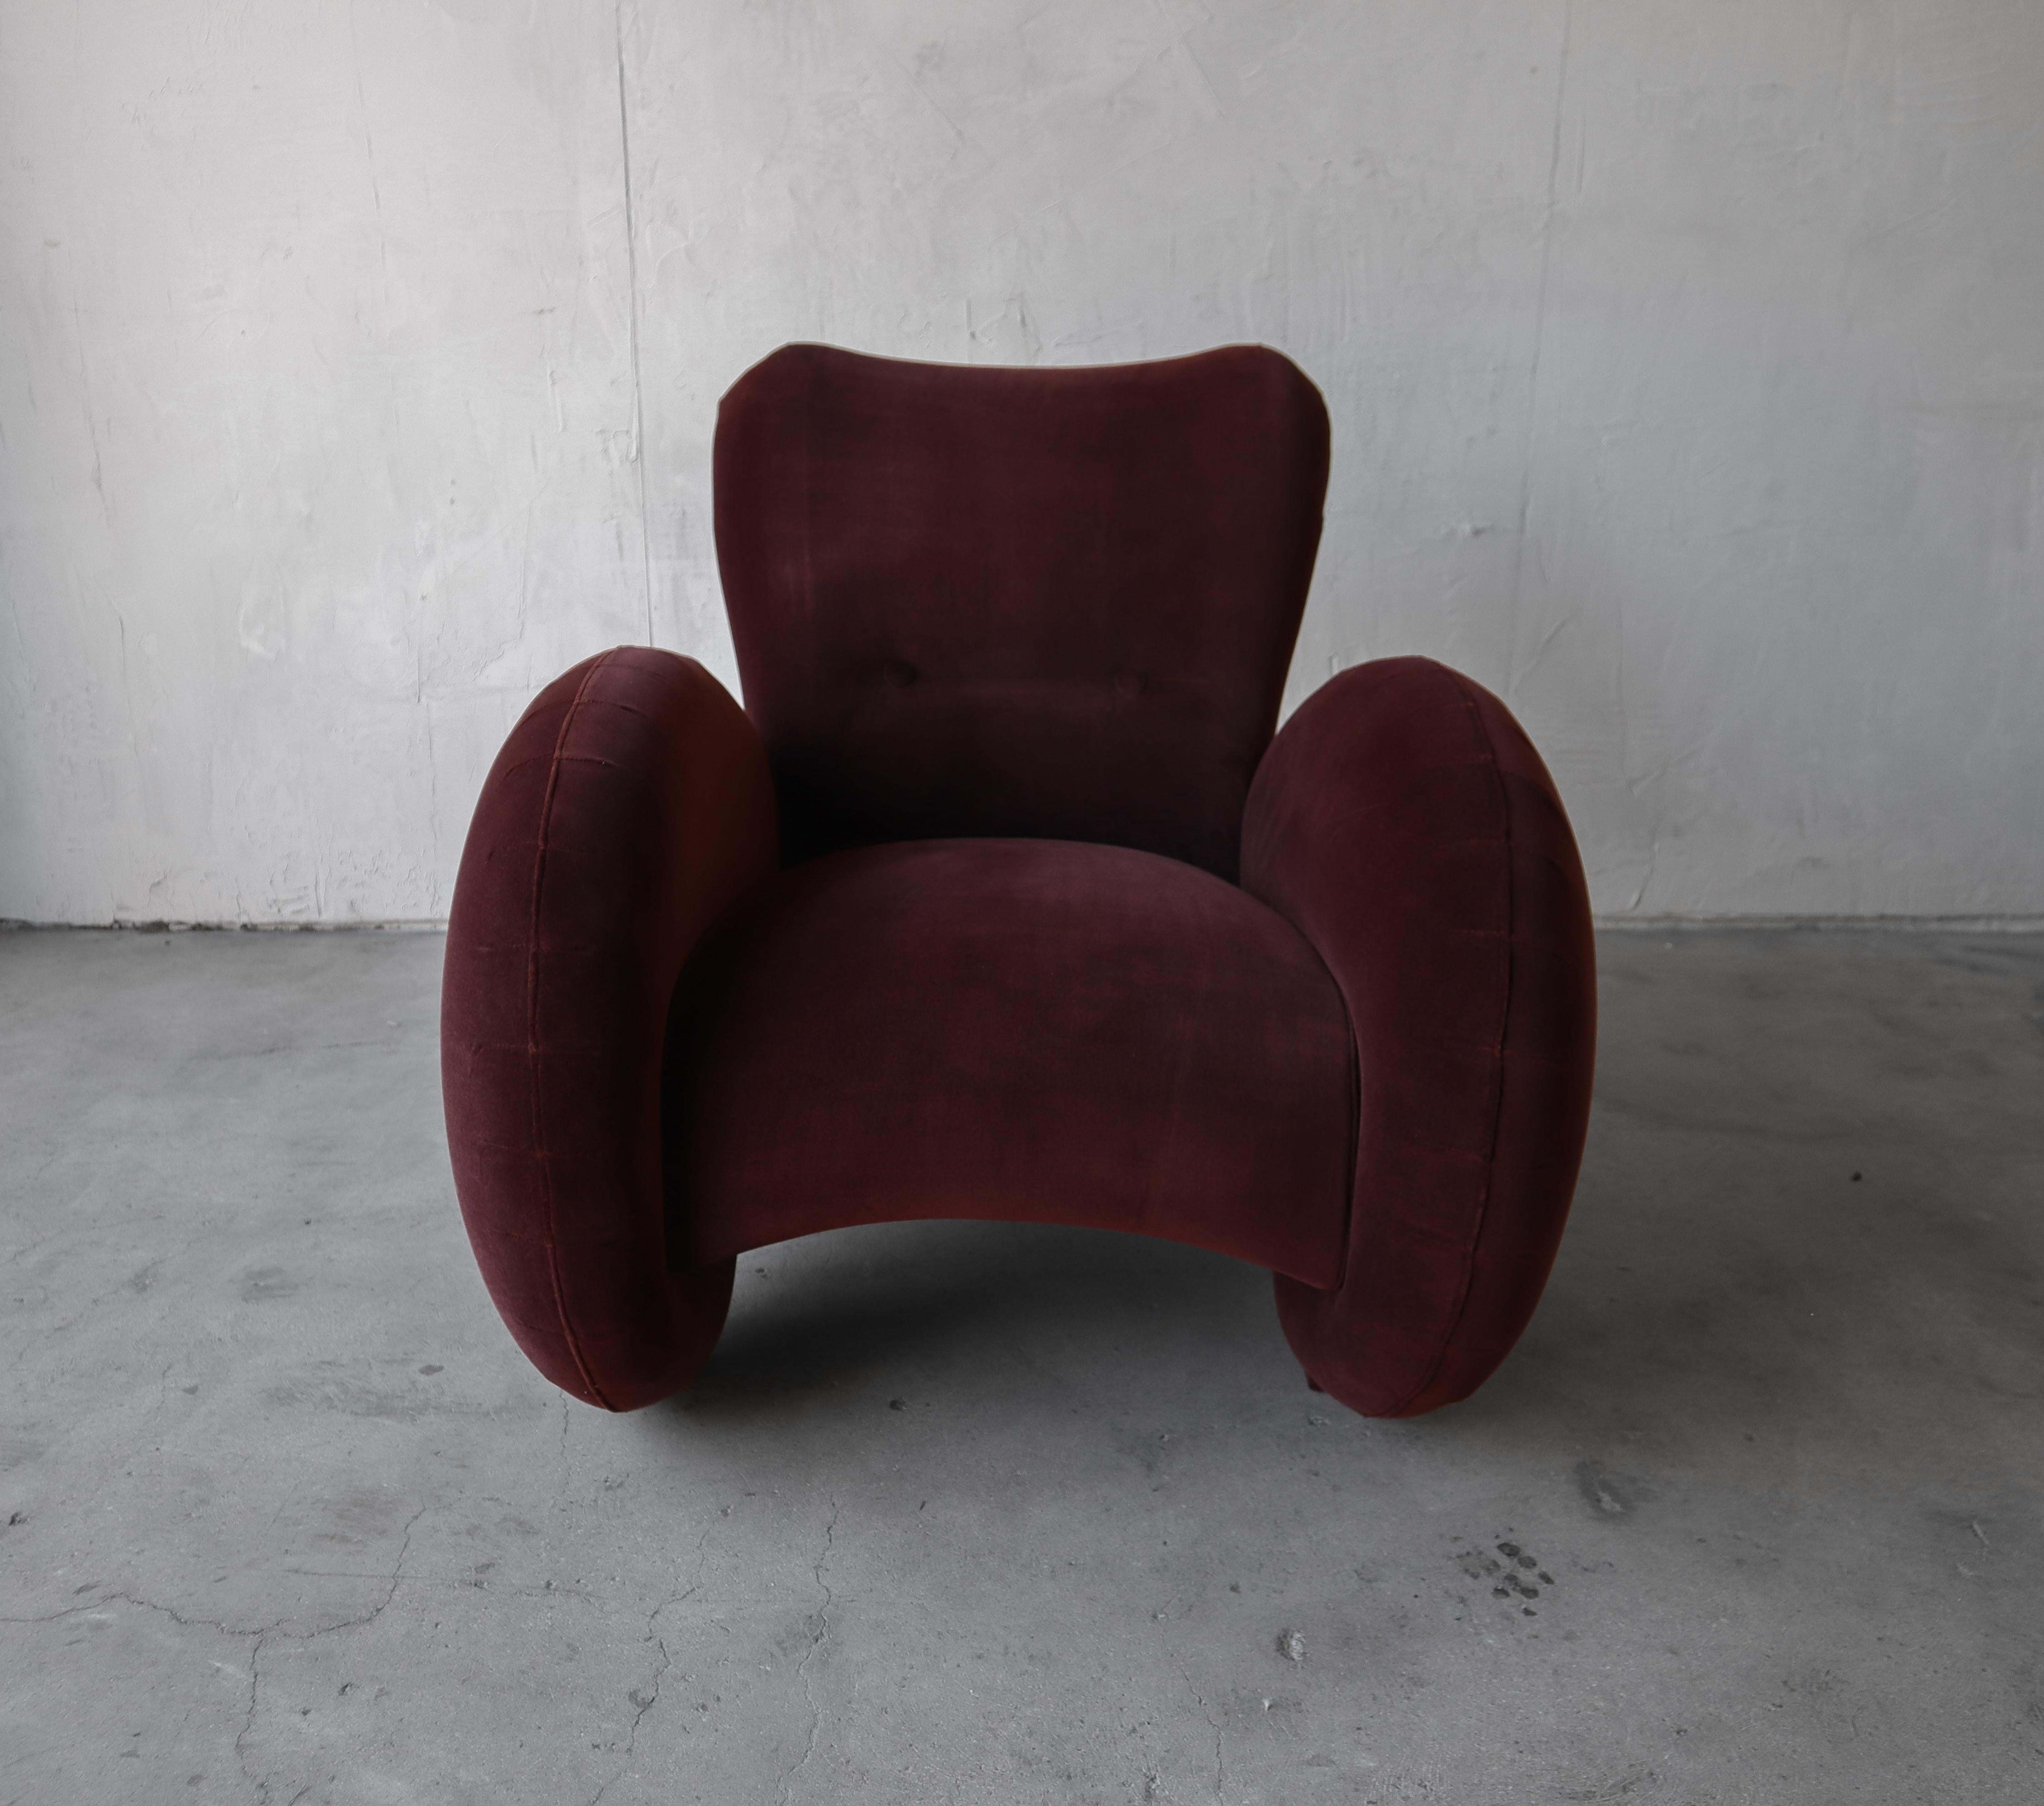 20th Century Italian Post Modern Sculptural Lounge Chair For Sale